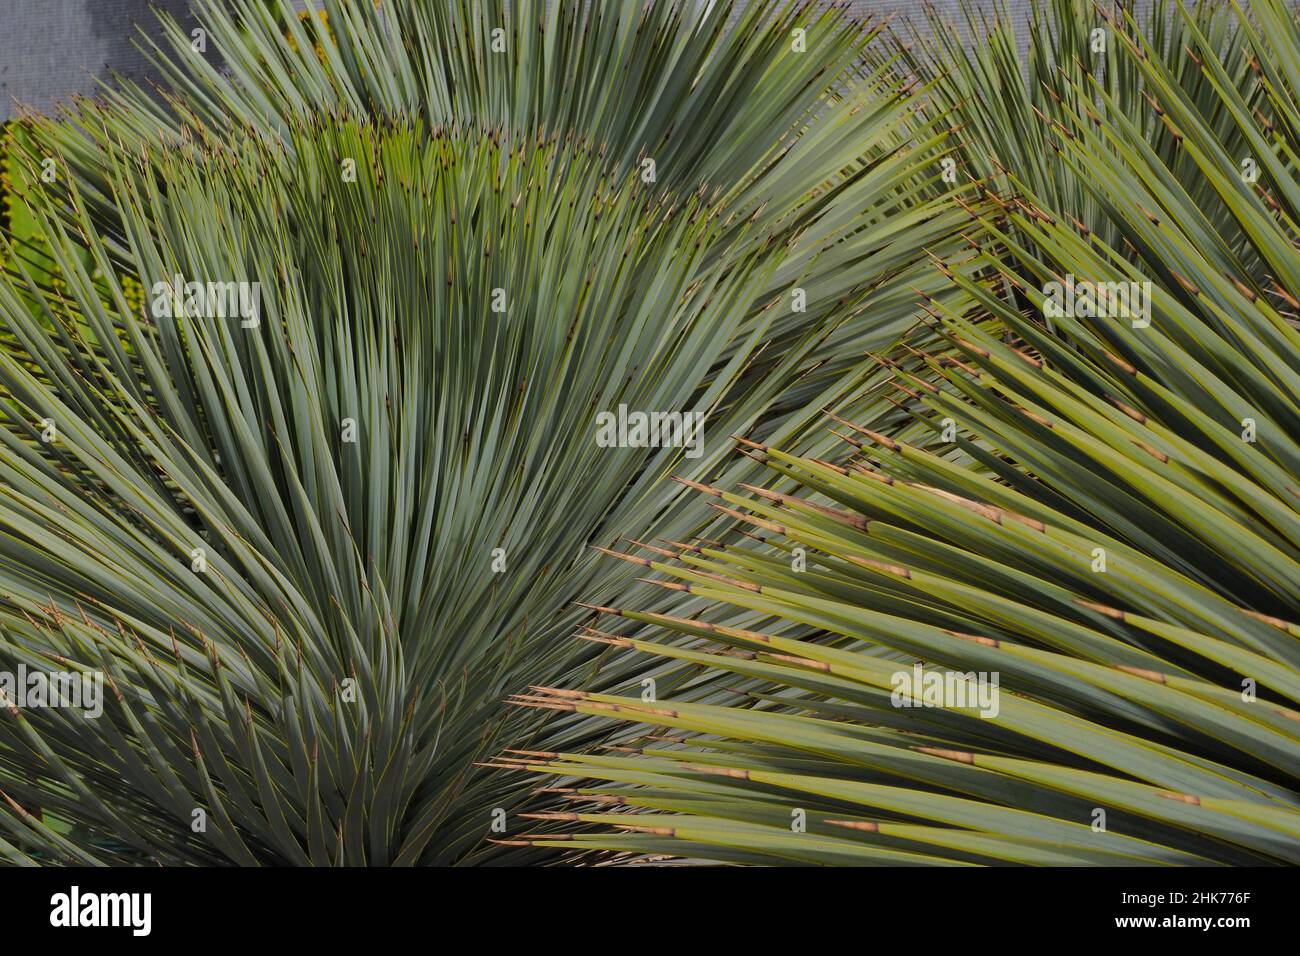 Brown tips of beaked yucca (Yucca rostrata), pointed palm leaves, palm species, plant disease, Spain Stock Photo